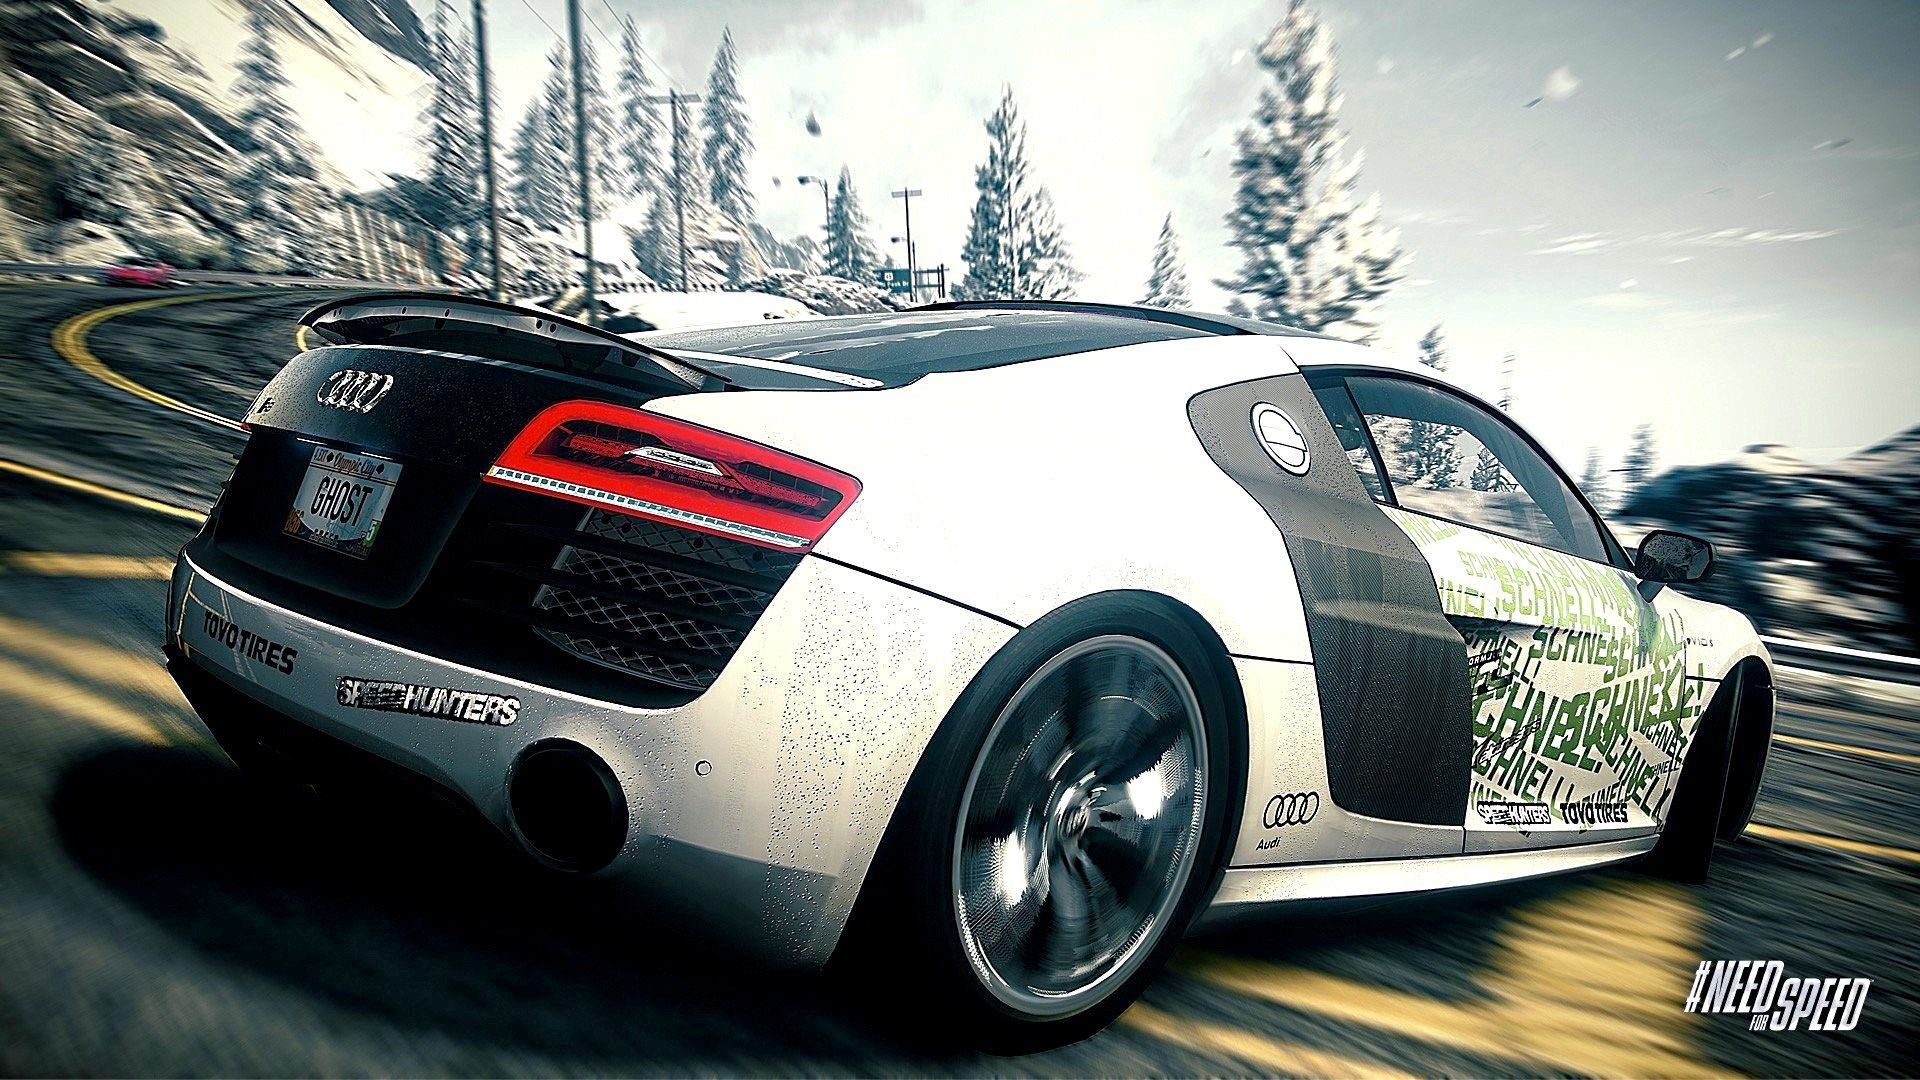 Free desktop need for speed rivals. Need for speed rivals, Need for speed cars, Need for speed